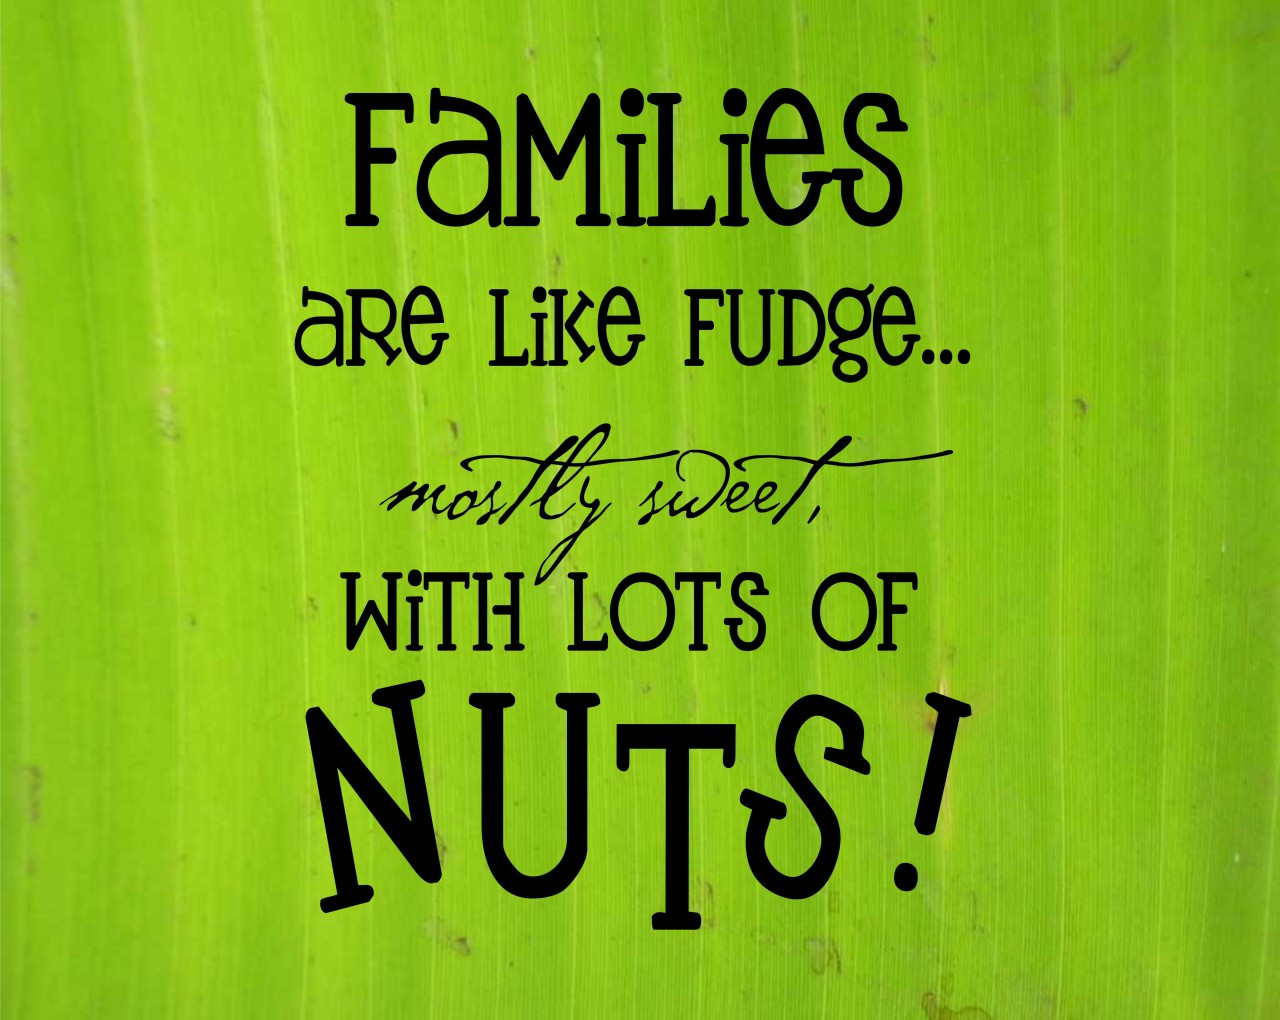 Family Quote Pictures
 Crazy Family Quotes QuotesGram